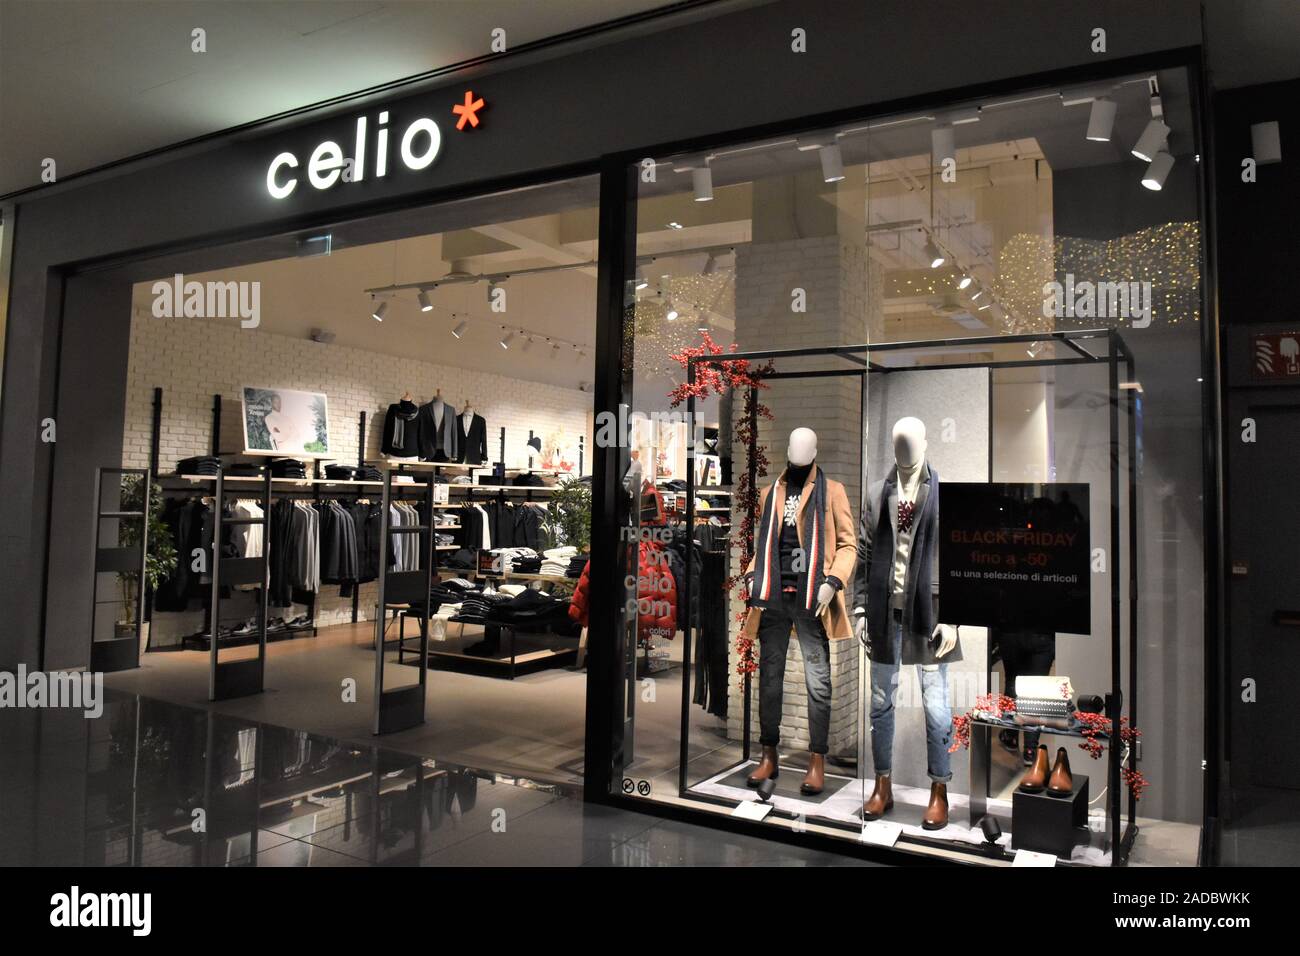 Celio store High Resolution Stock Photography and Images - Alamy